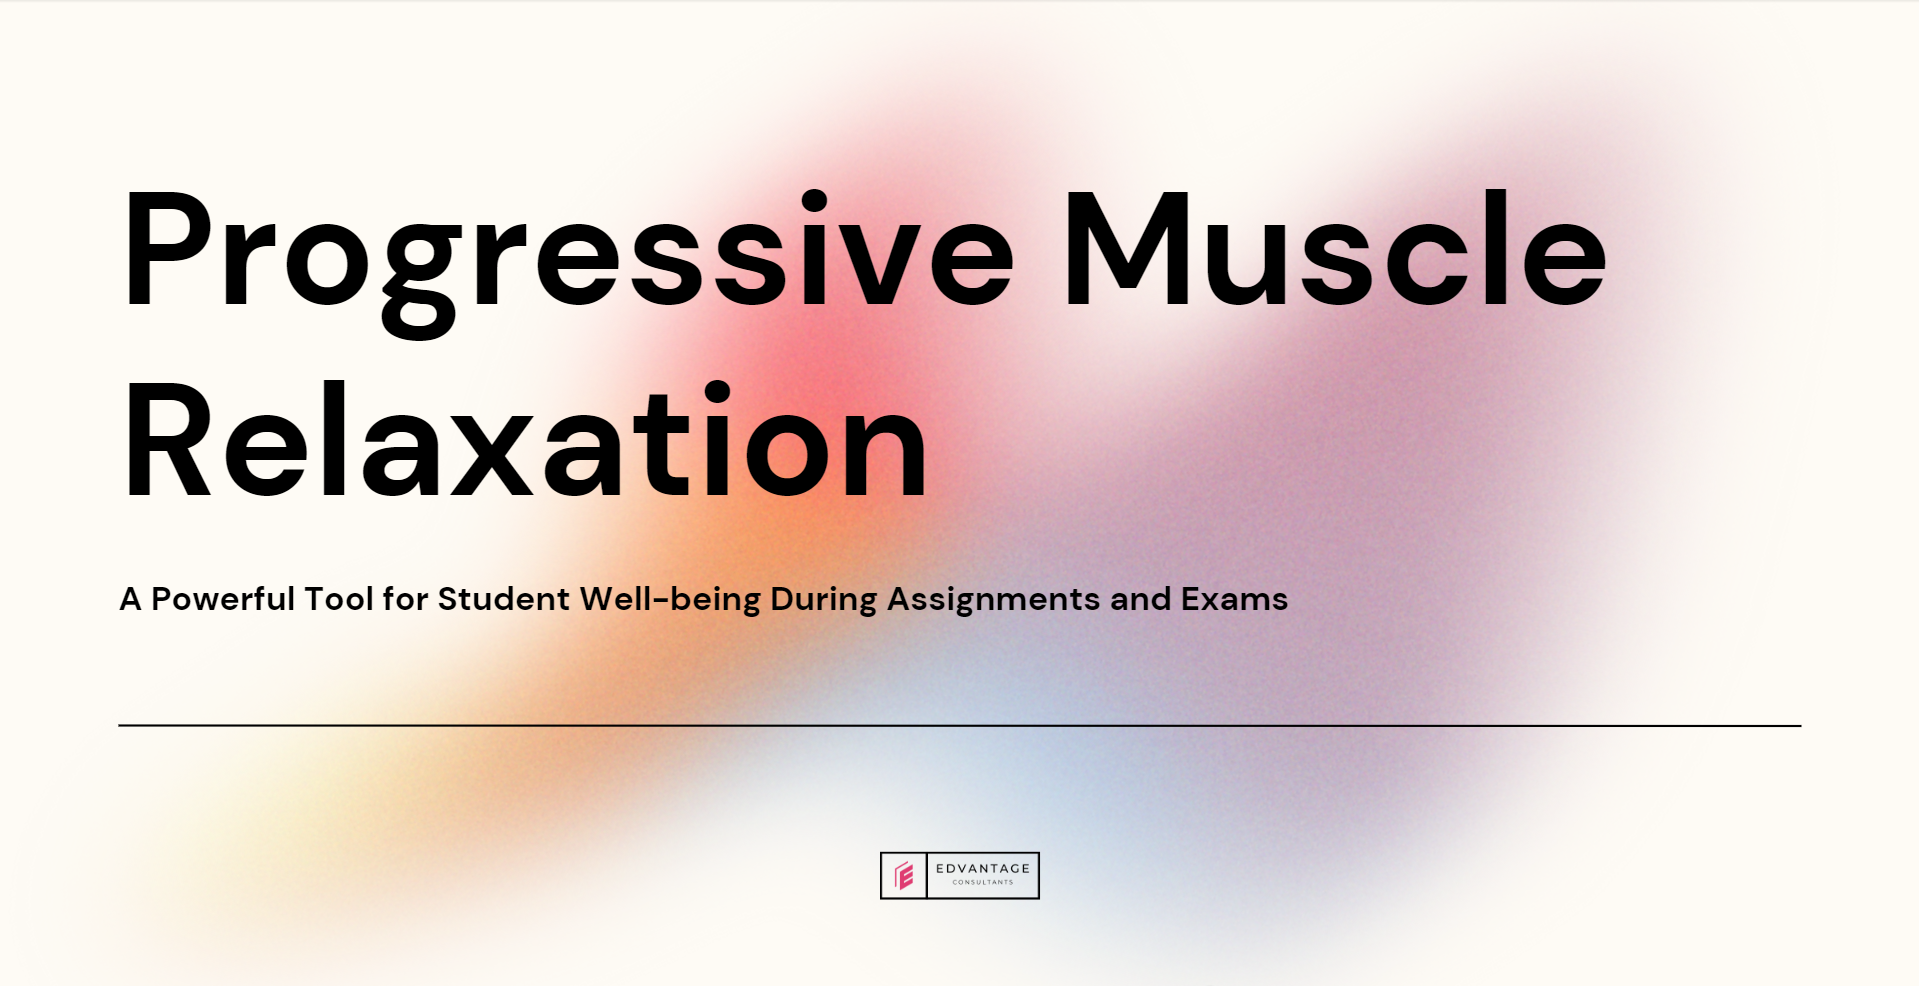 Progressive Muscle Relaxation (PMR): A Powerful Tool for Student Well-being During Assignments and Exams